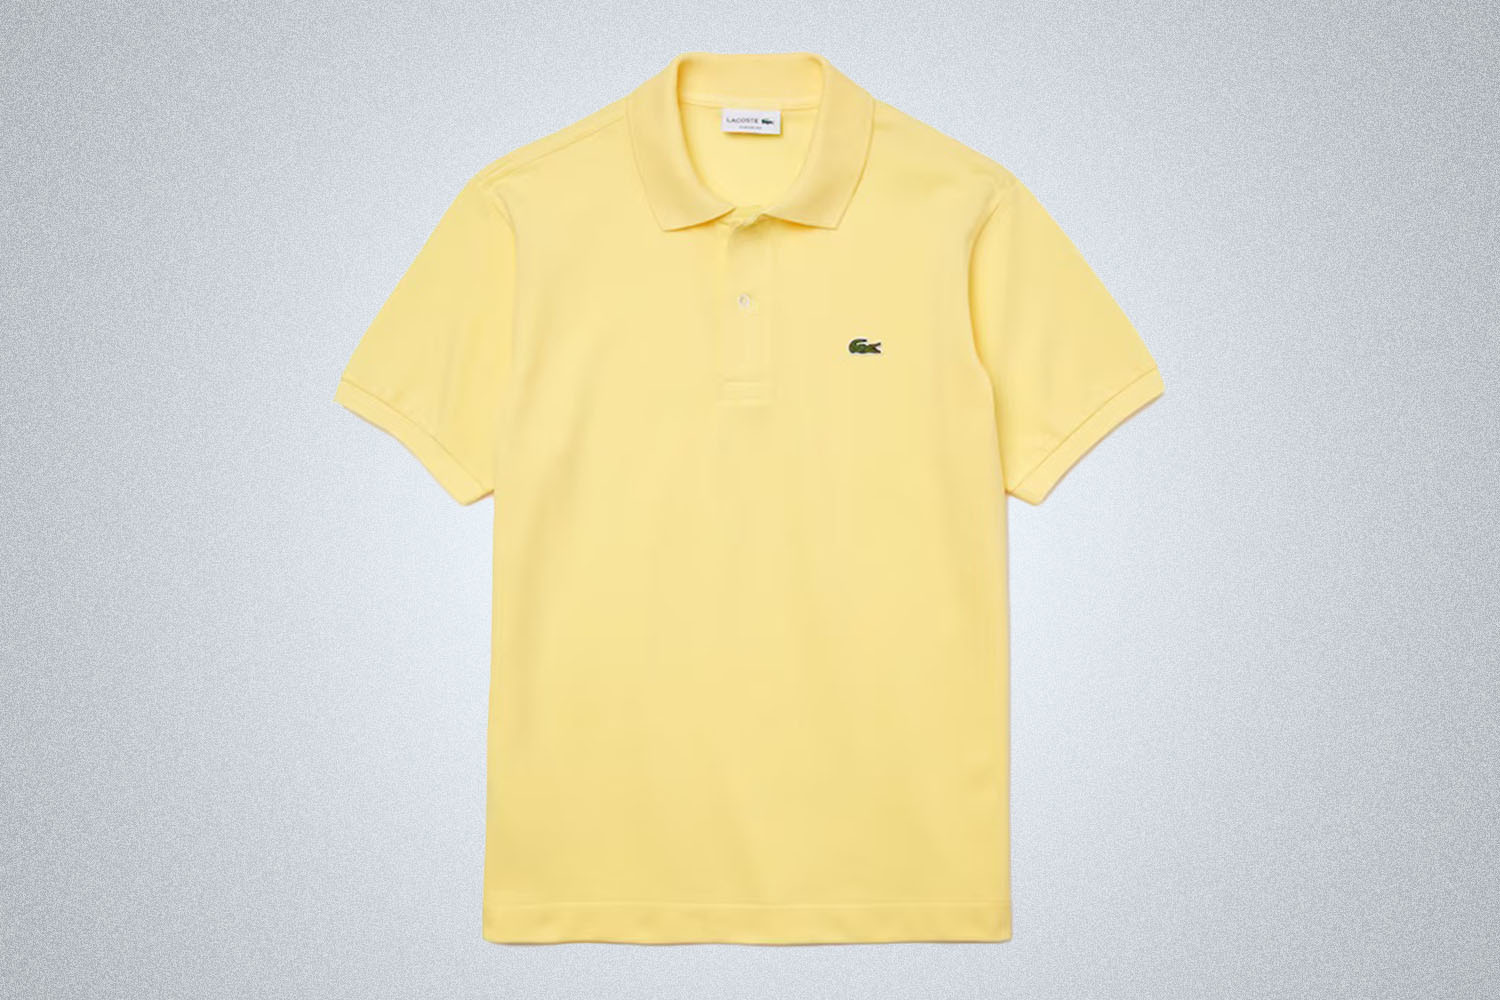 Which Lacoste Polo Fit Is Best For You?